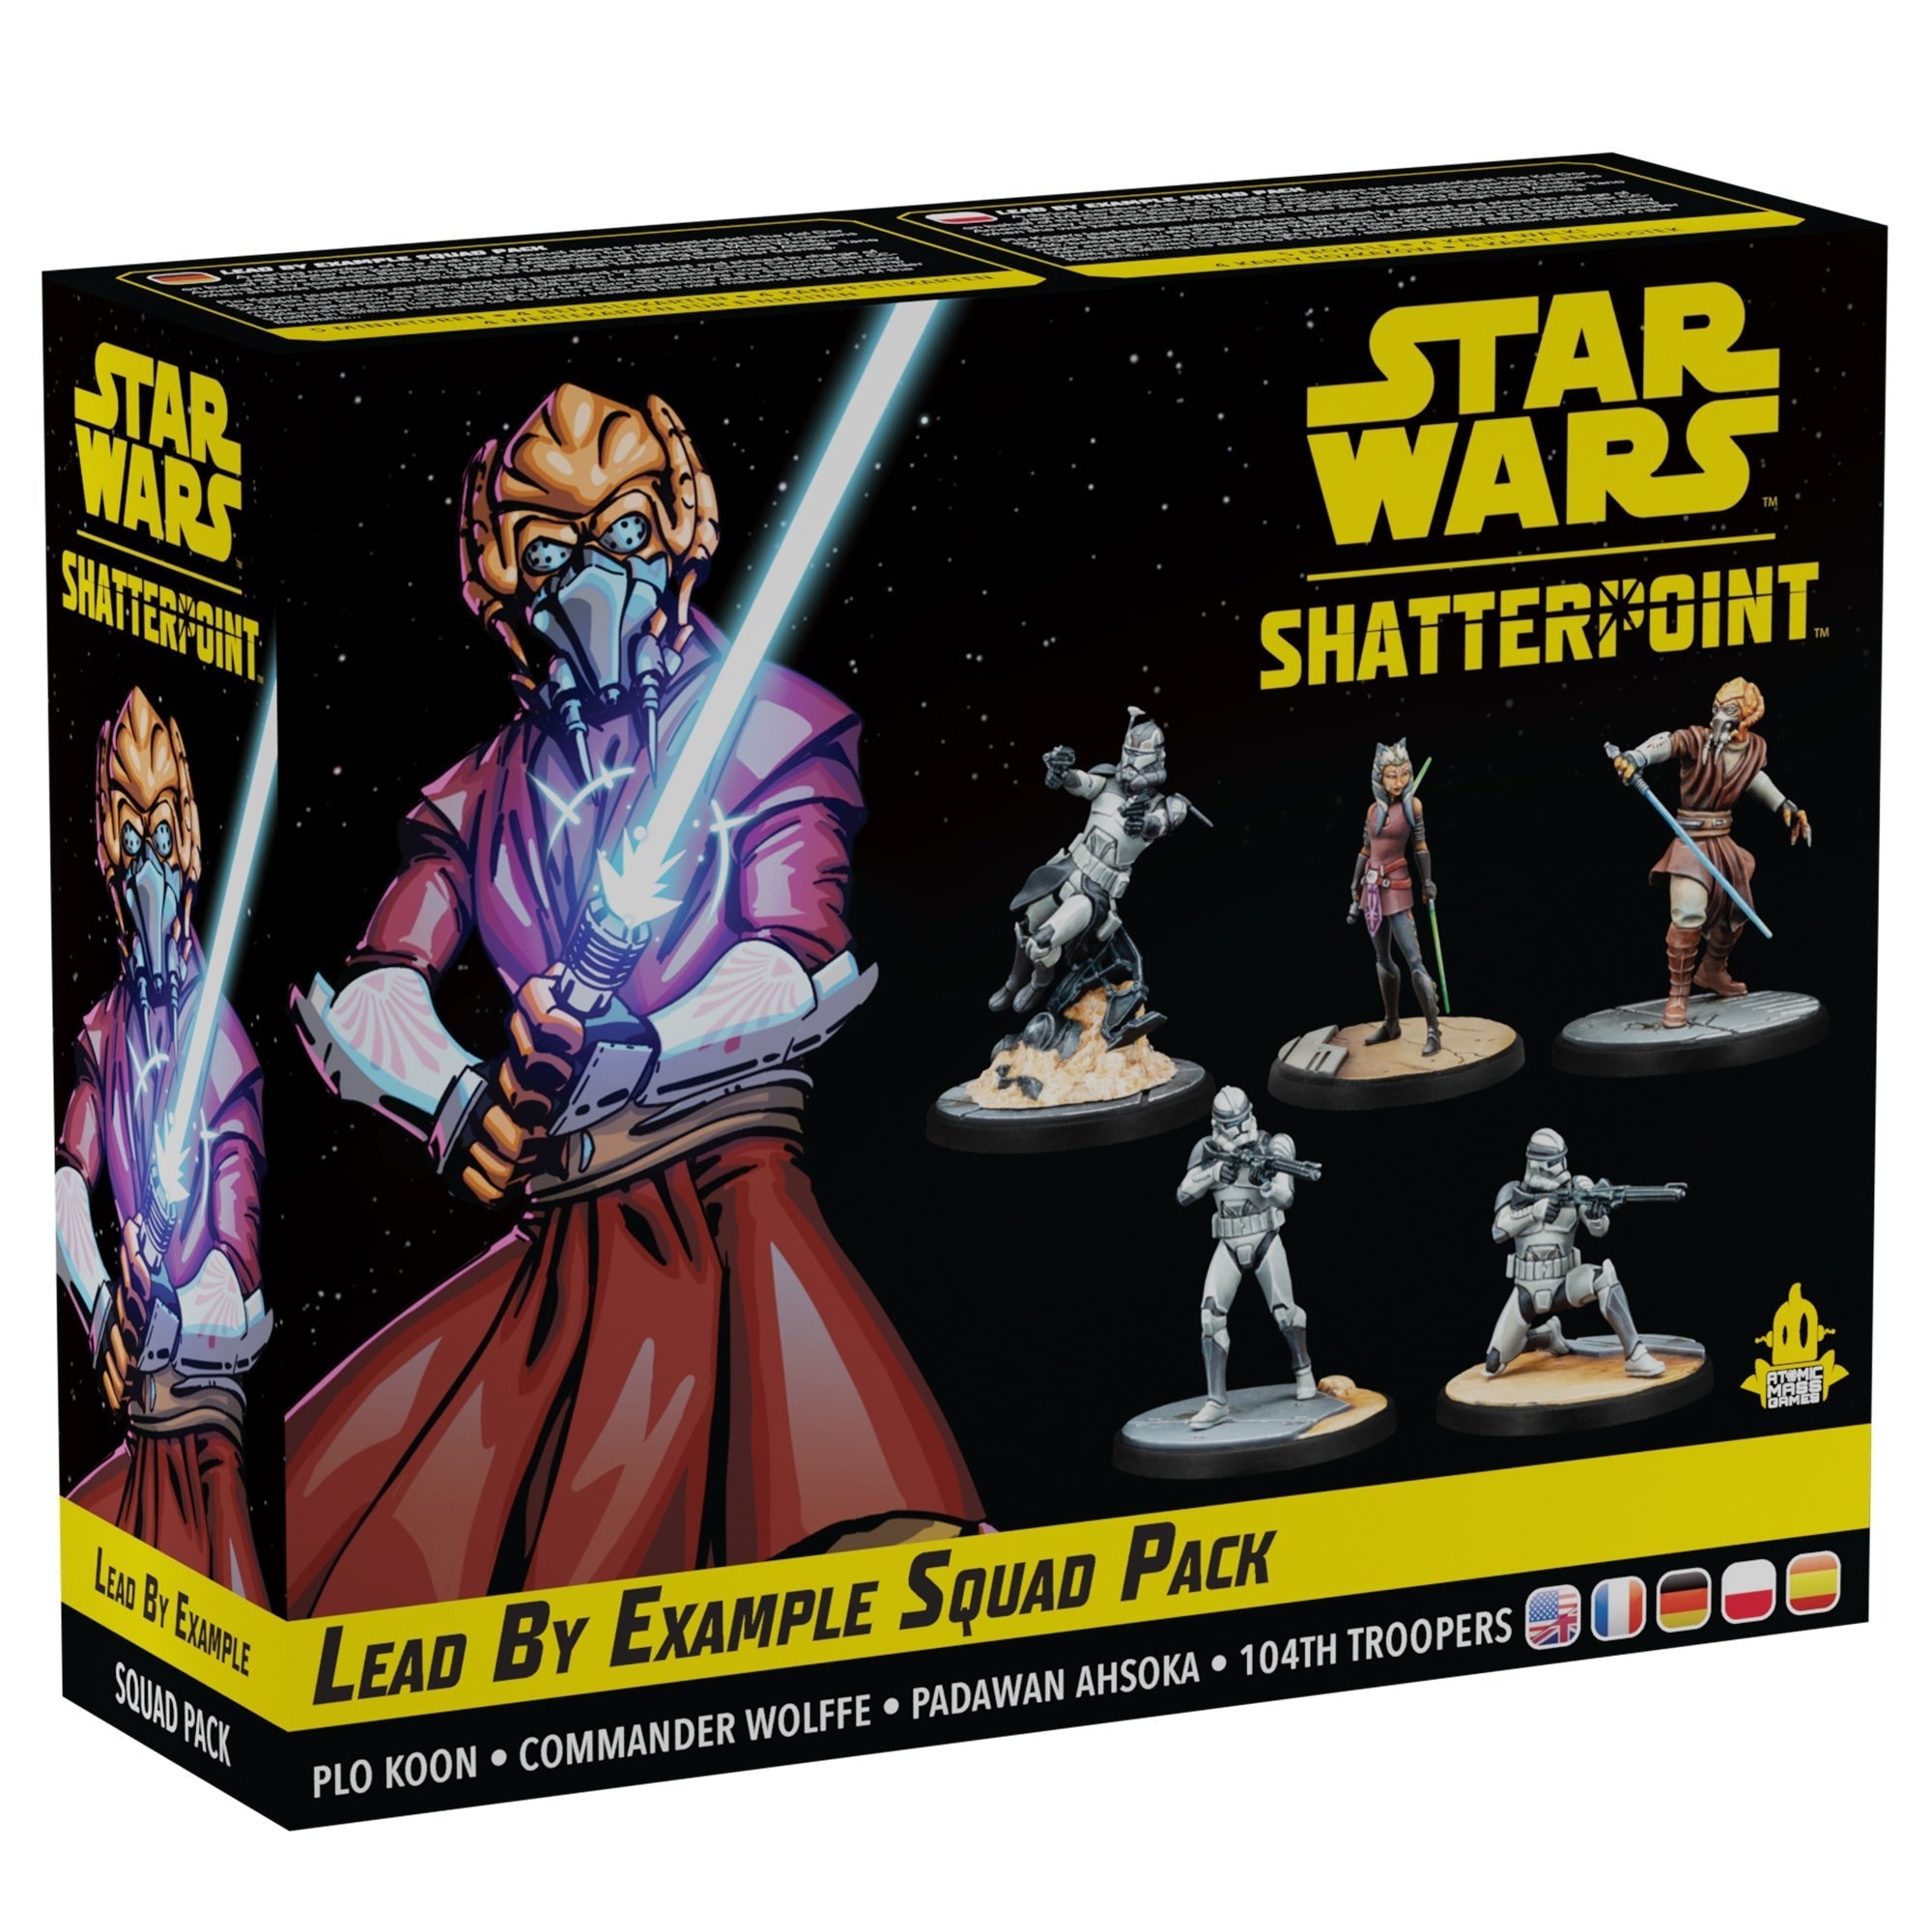 Lead By Example: Plo Koon Squad Pack